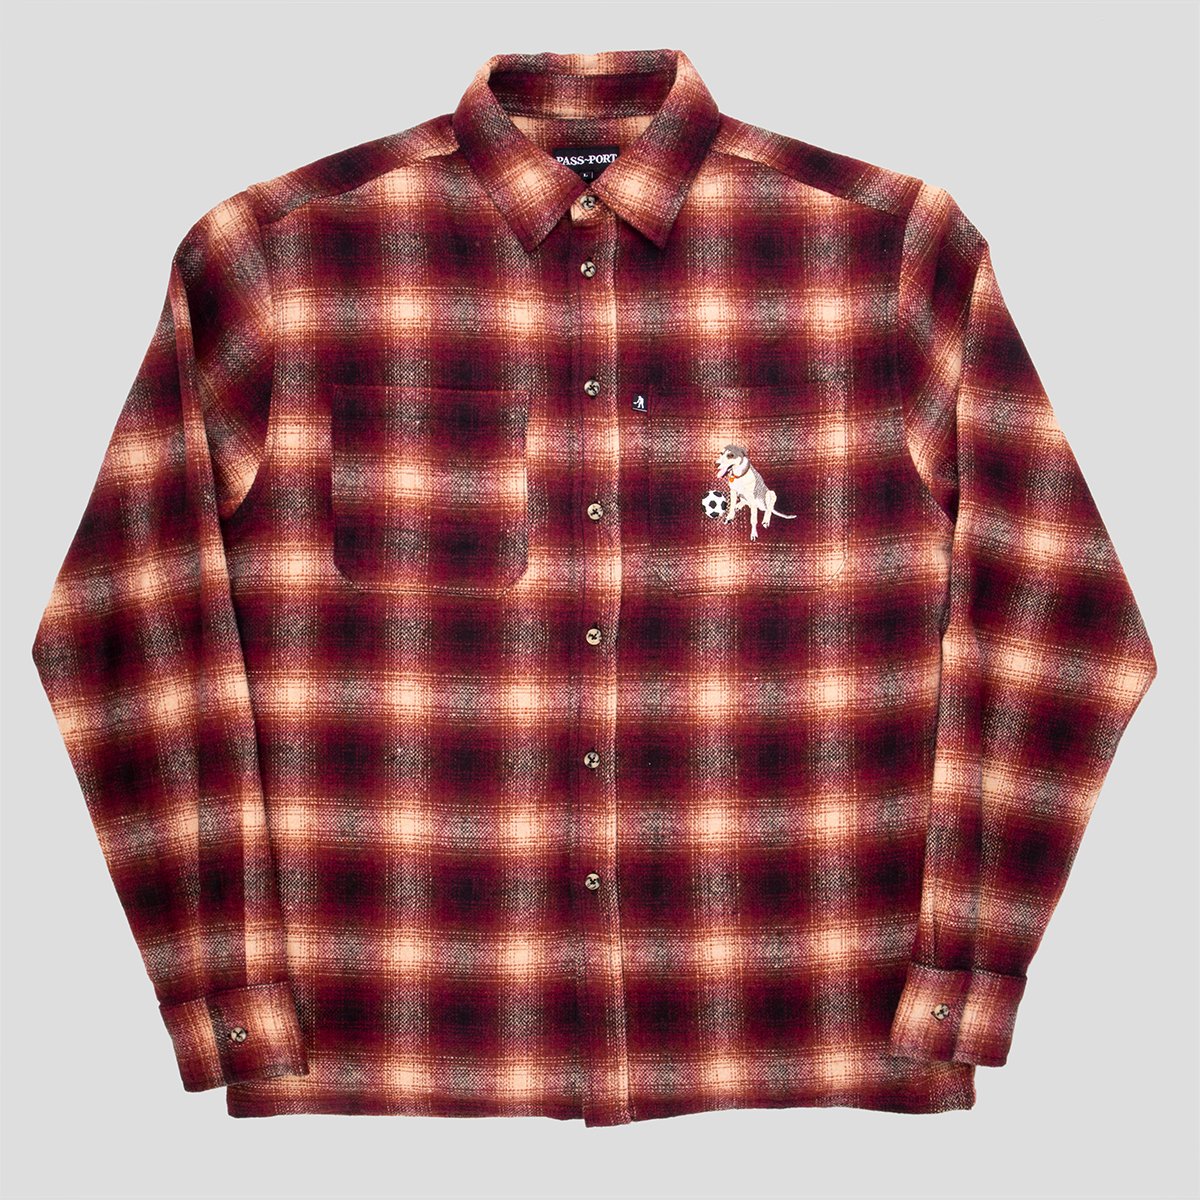 PASS~PORT "BOBBY" FLANNEL RED